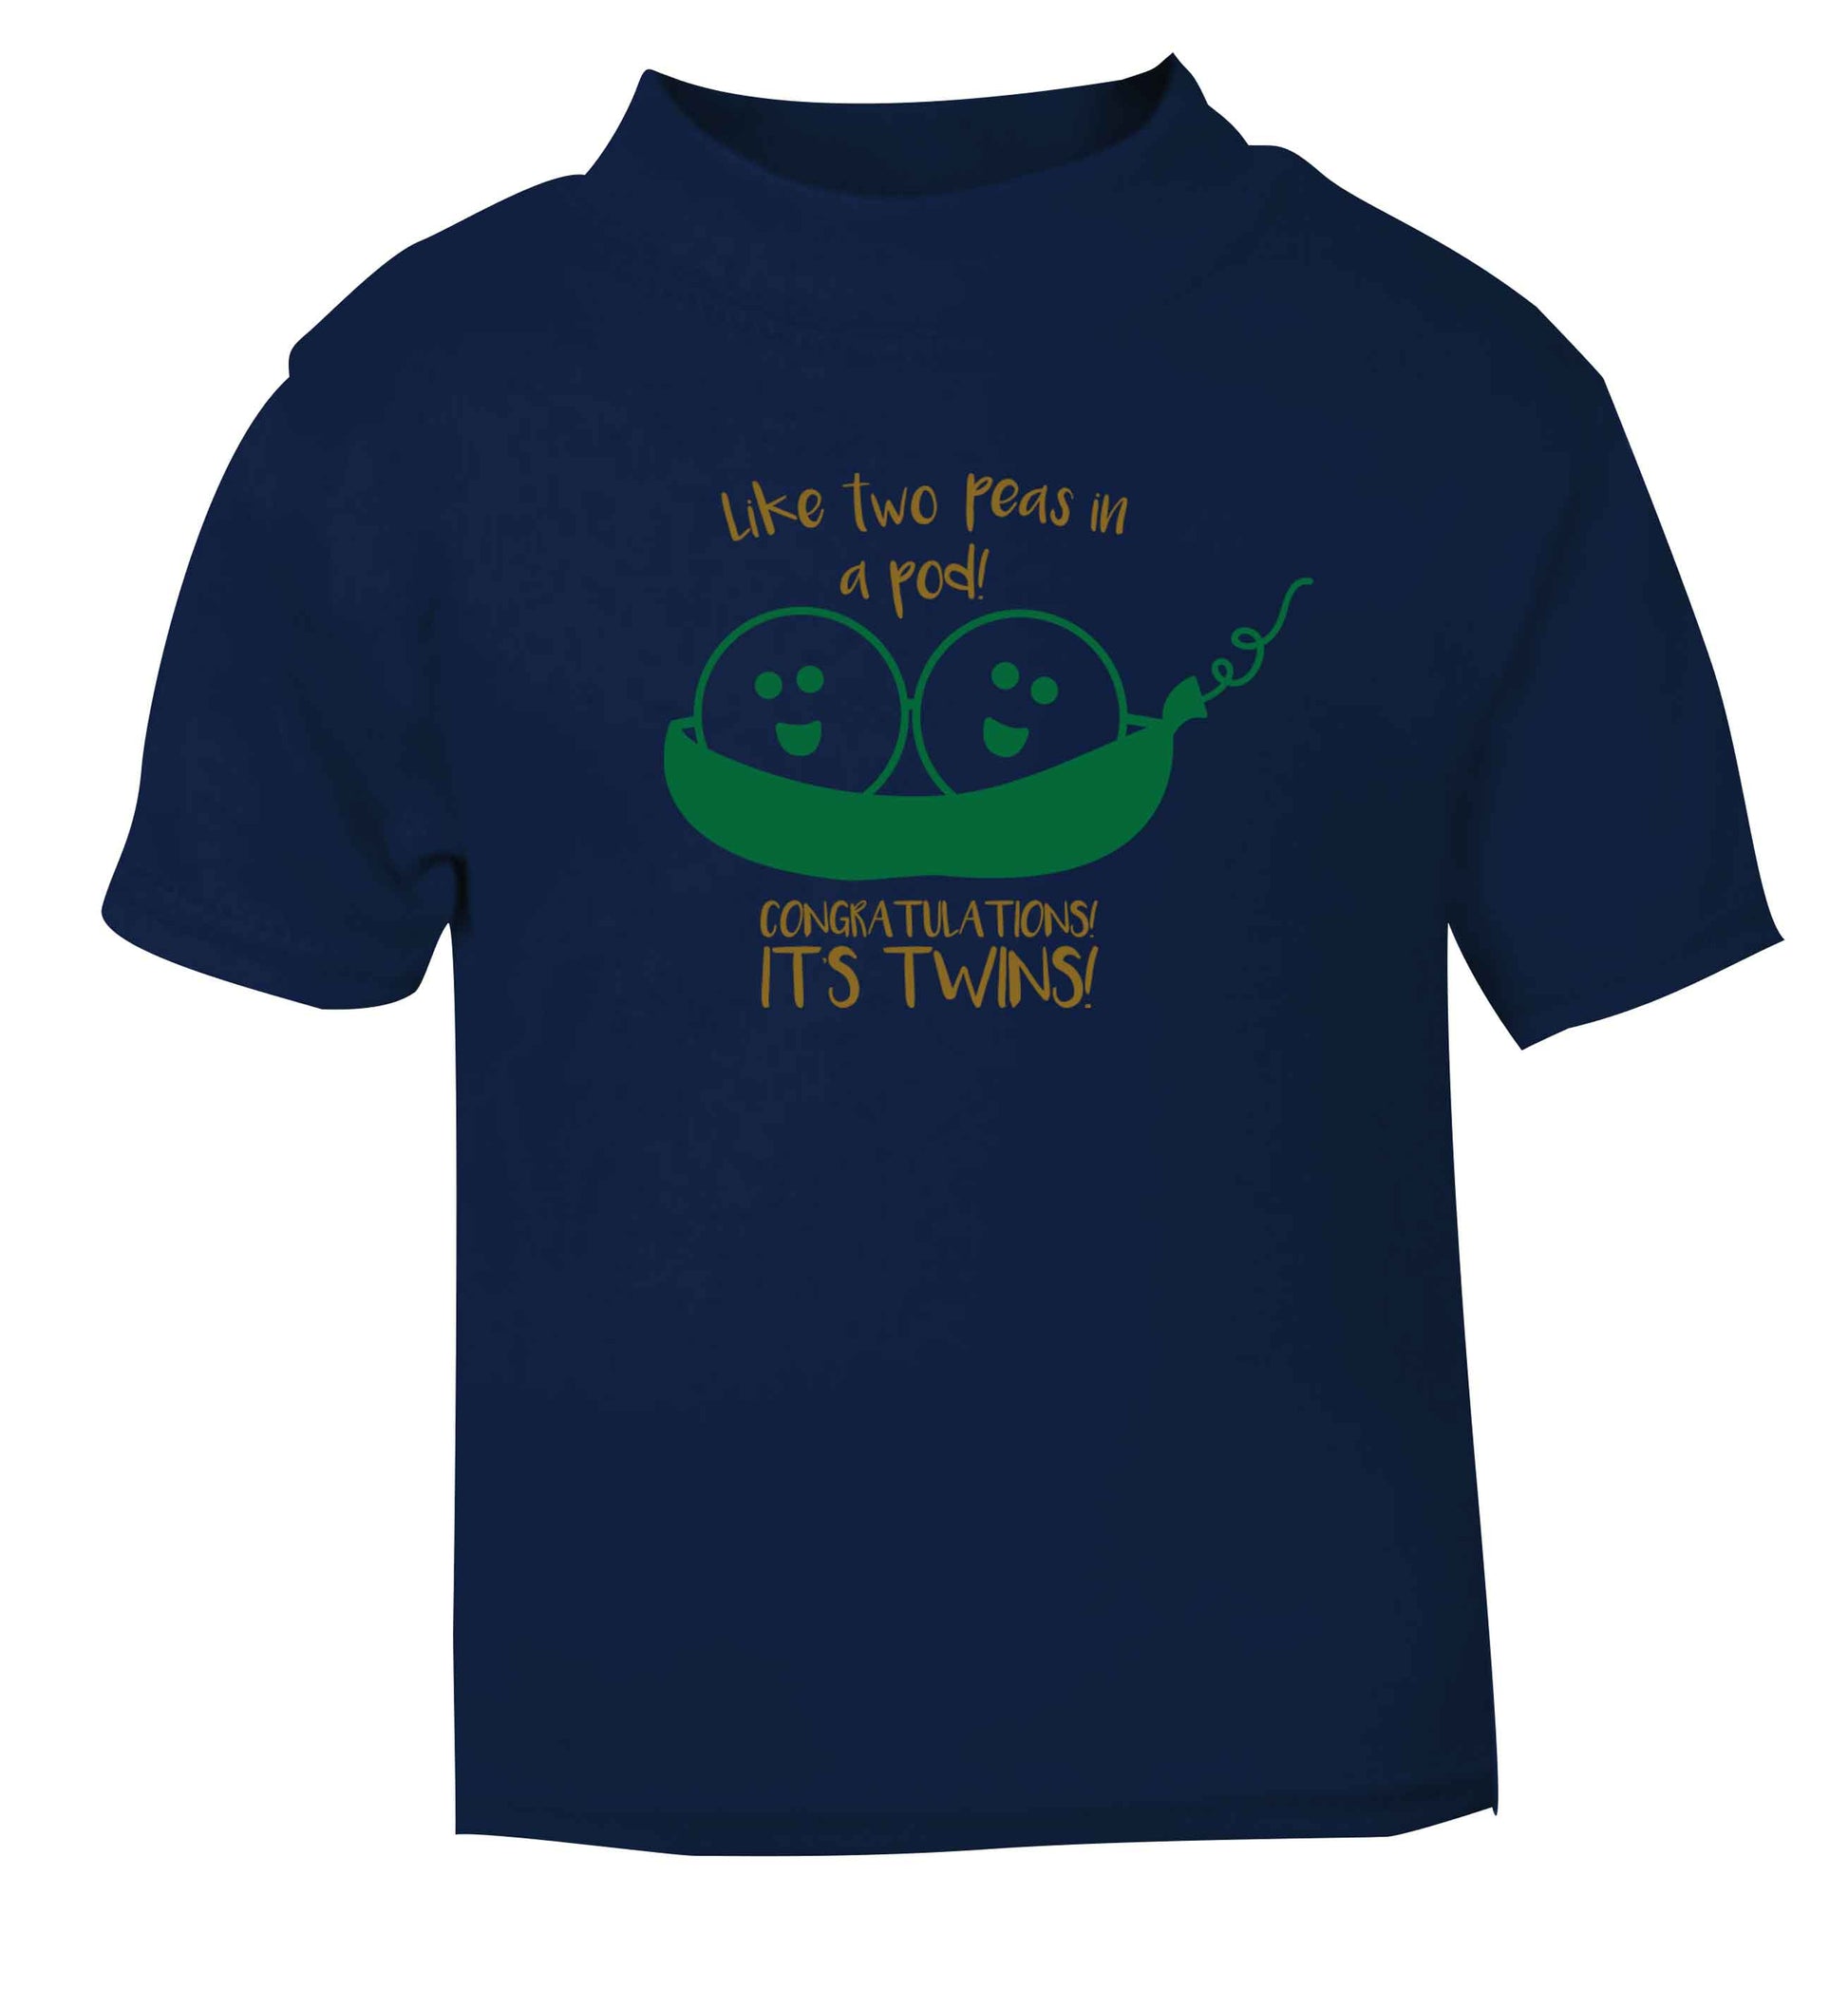 Like two peas in a pod! Congratulations it's twins! navy baby toddler Tshirt 2 Years